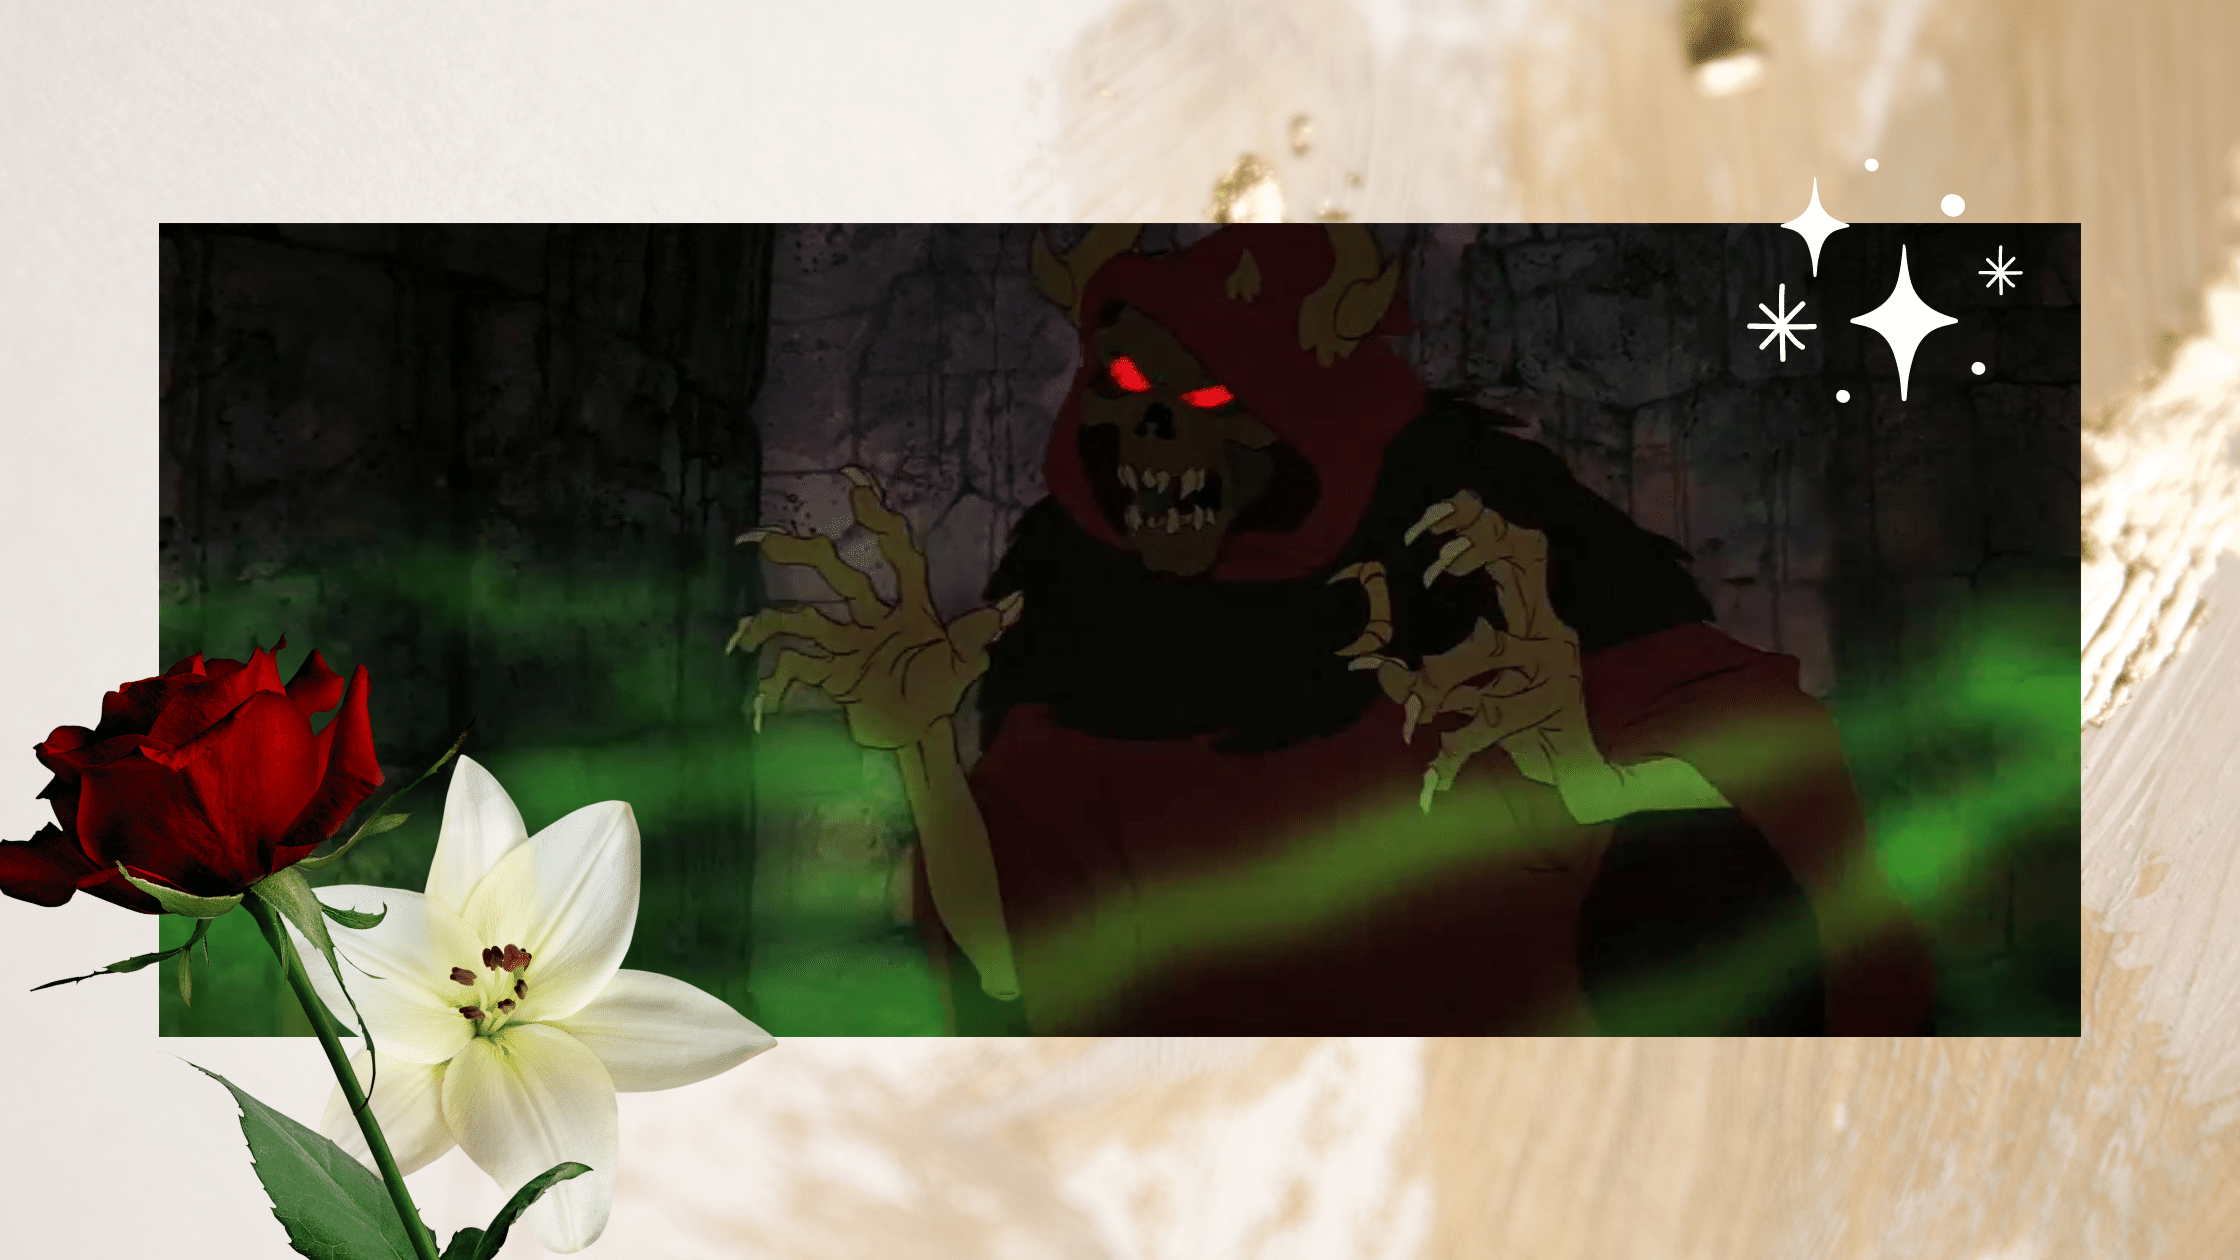 25 Types of Fairy Tale Creatures found in Disney Movies